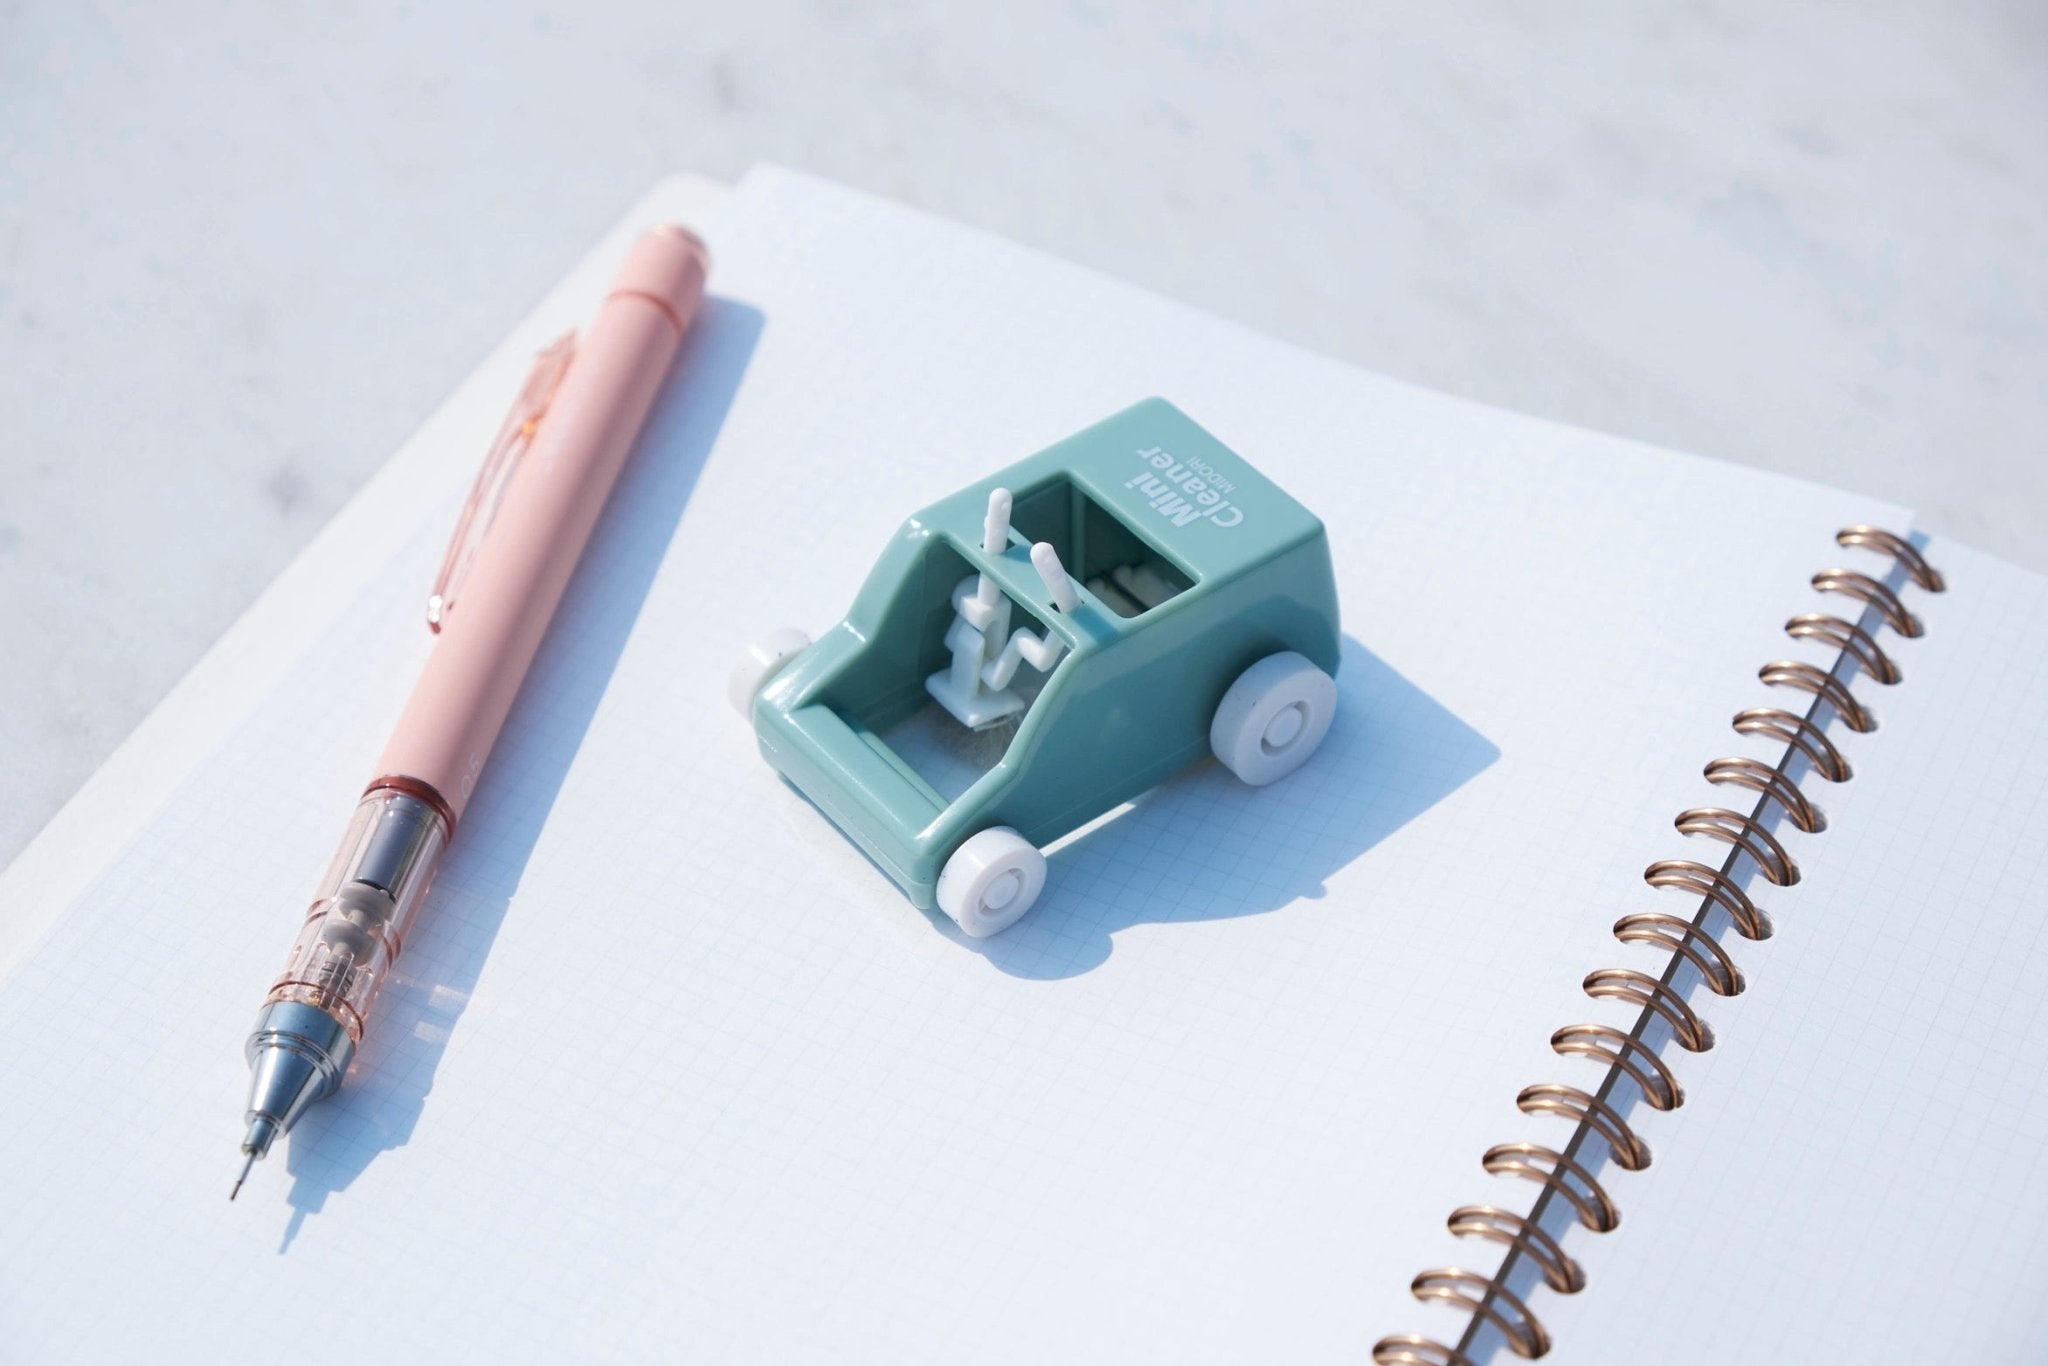 Japanese Stationery Brands: The Secret to a Better Writing Experience –  bungu